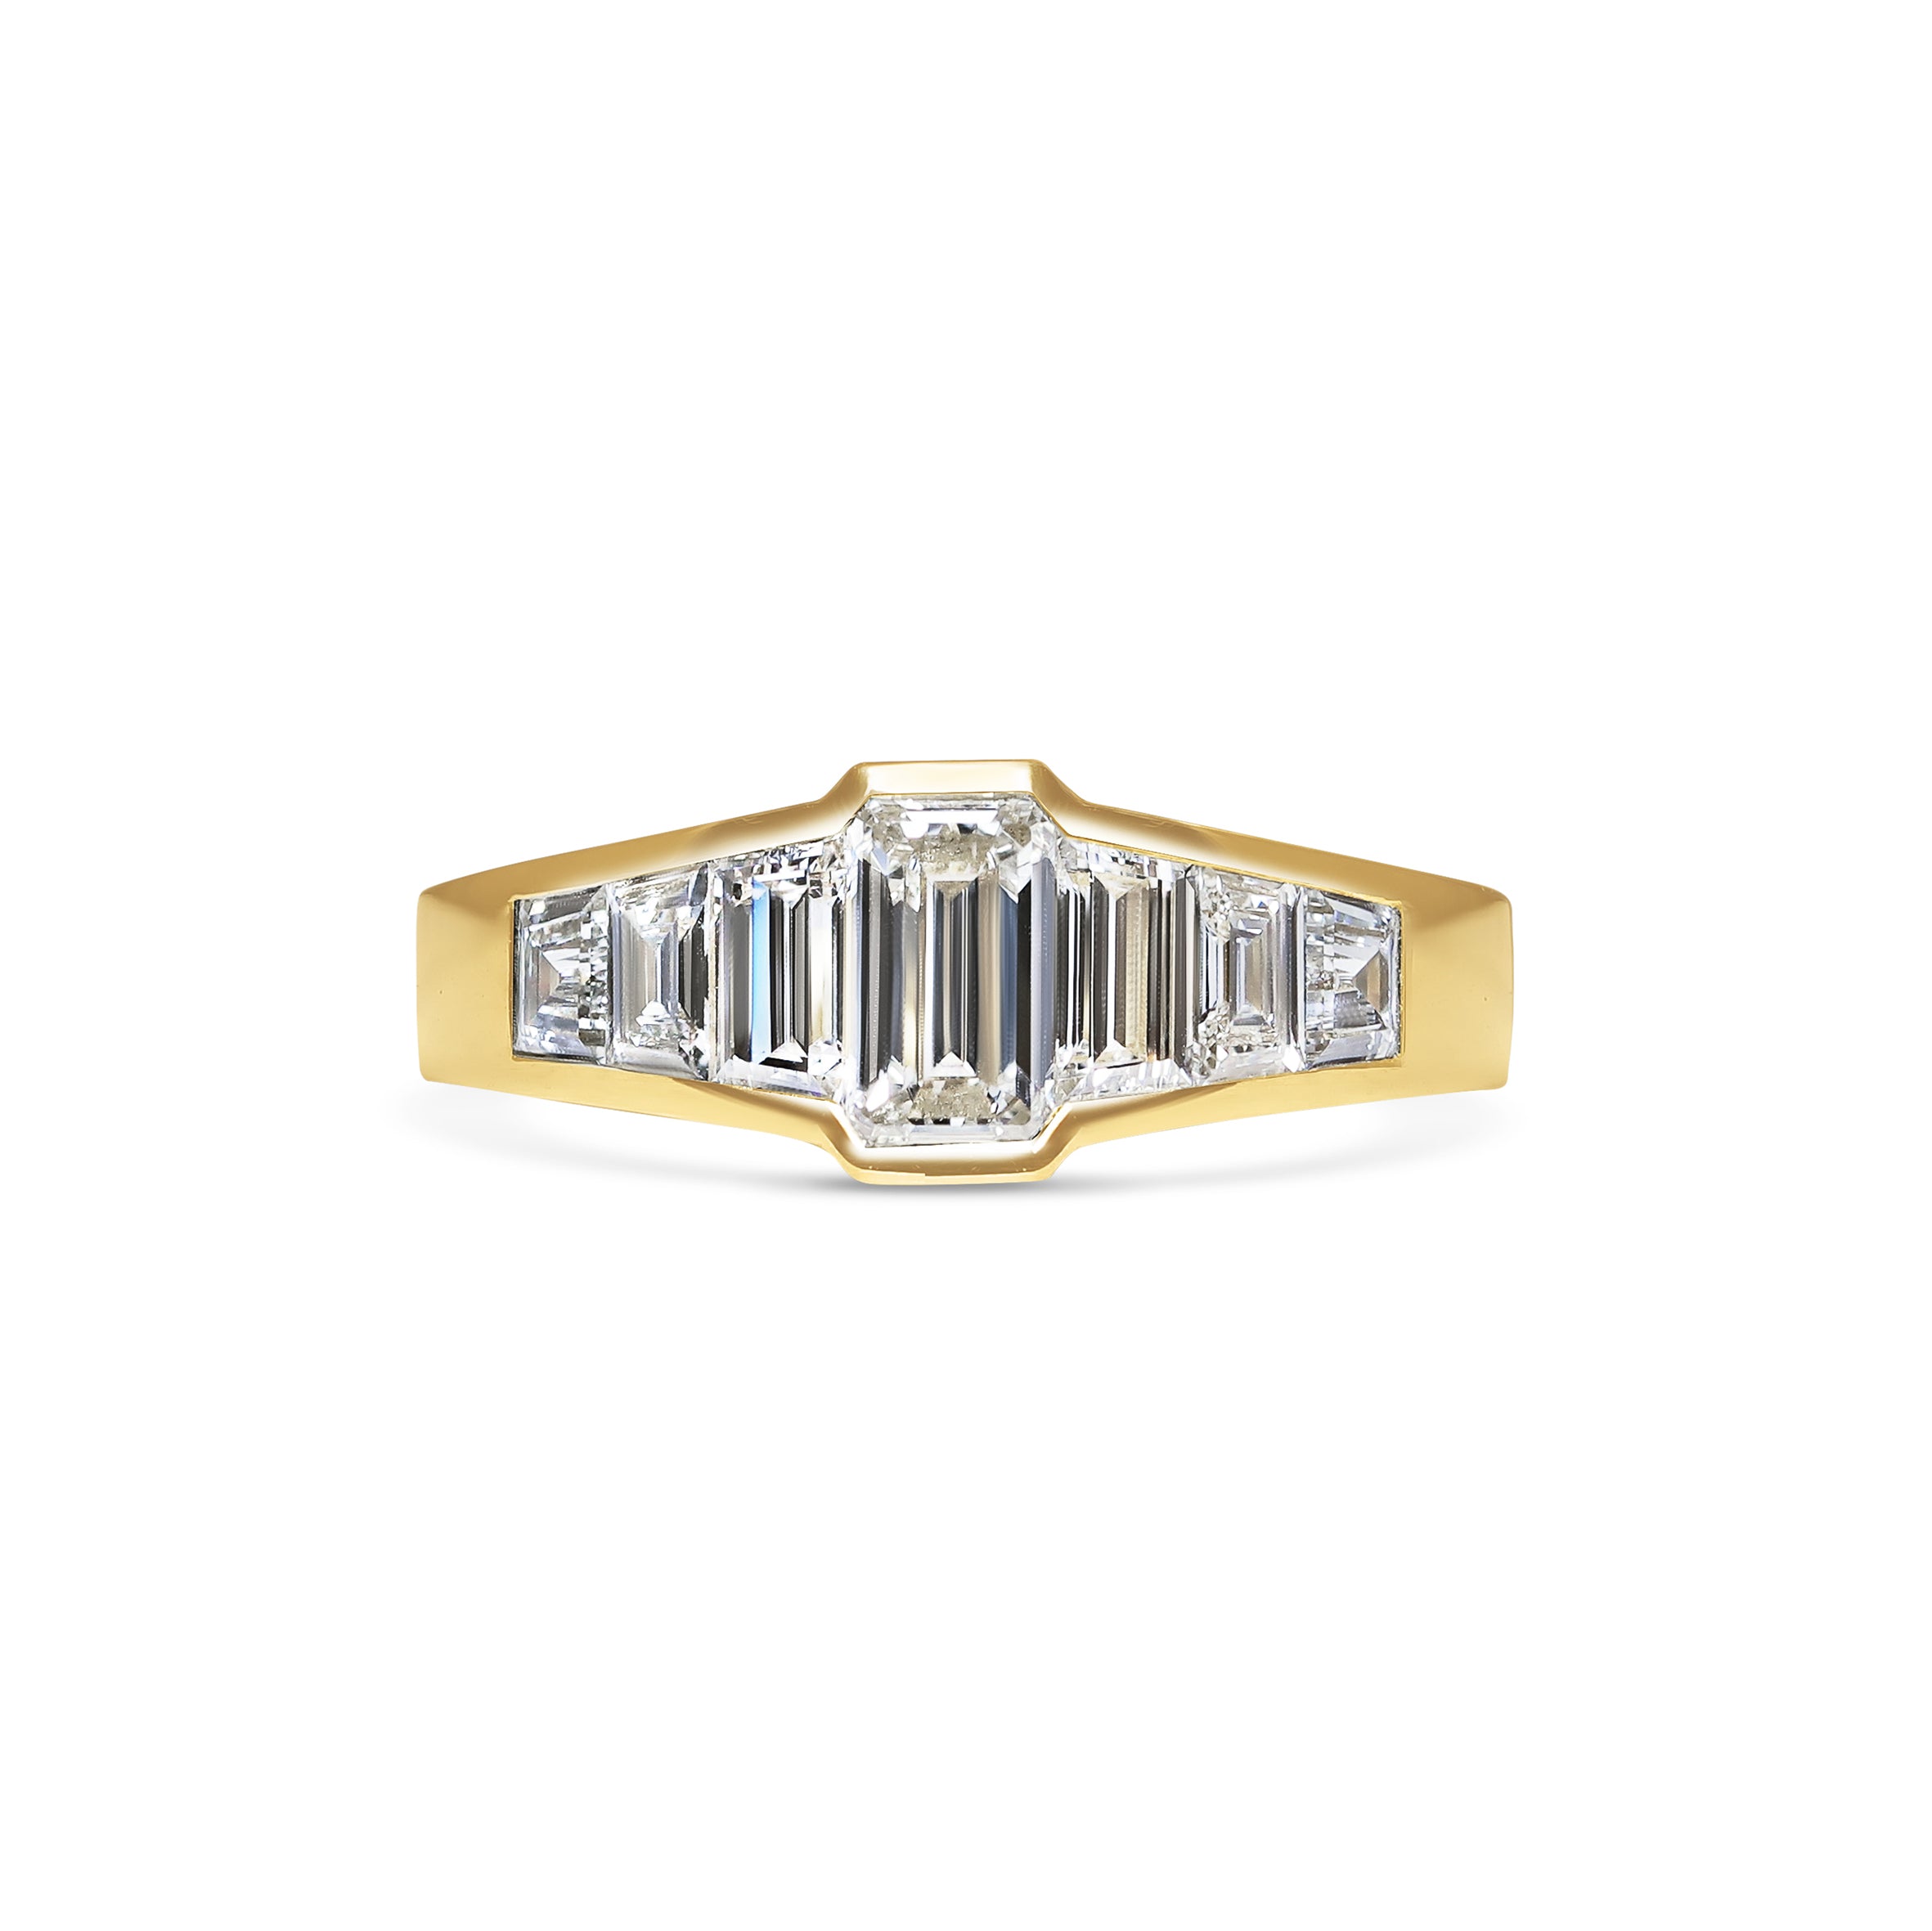 The Nova Ring by East London jeweller Rachel Boston | Discover our collections of unique and timeless engagement rings, wedding rings, and modern fine jewellery.